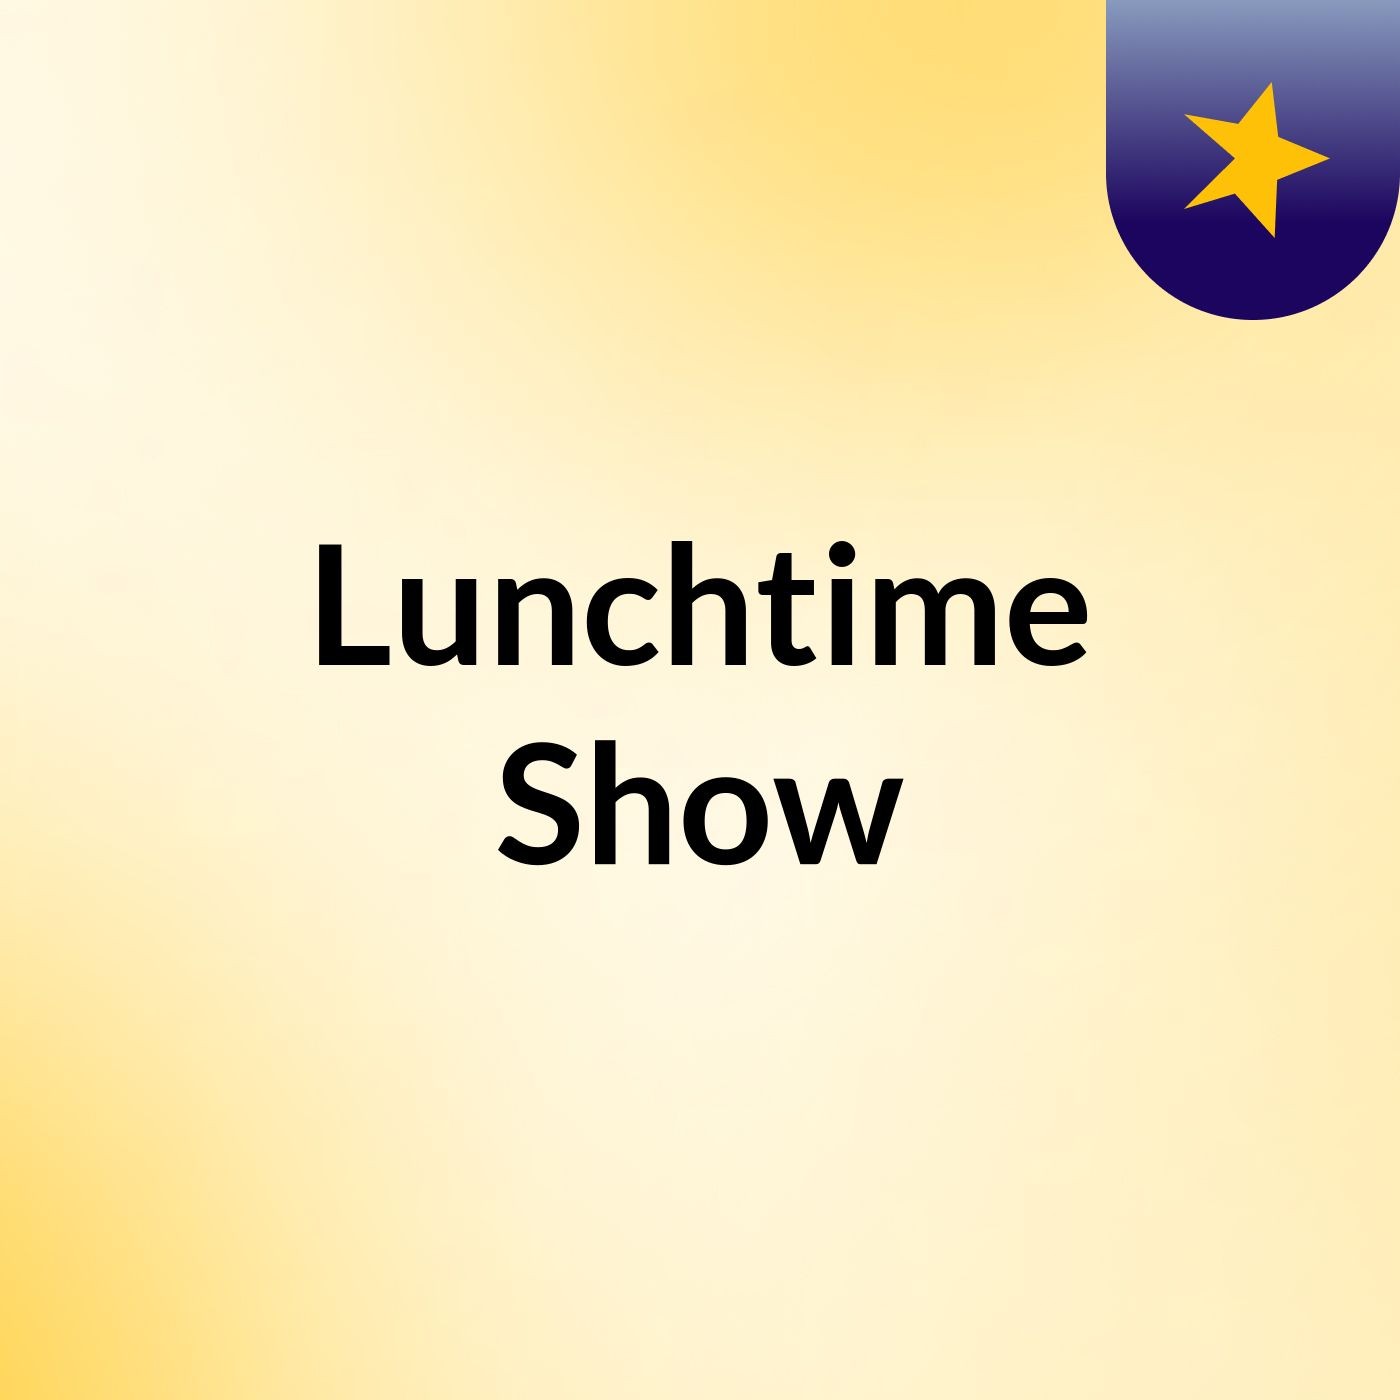 Lunchtime Show